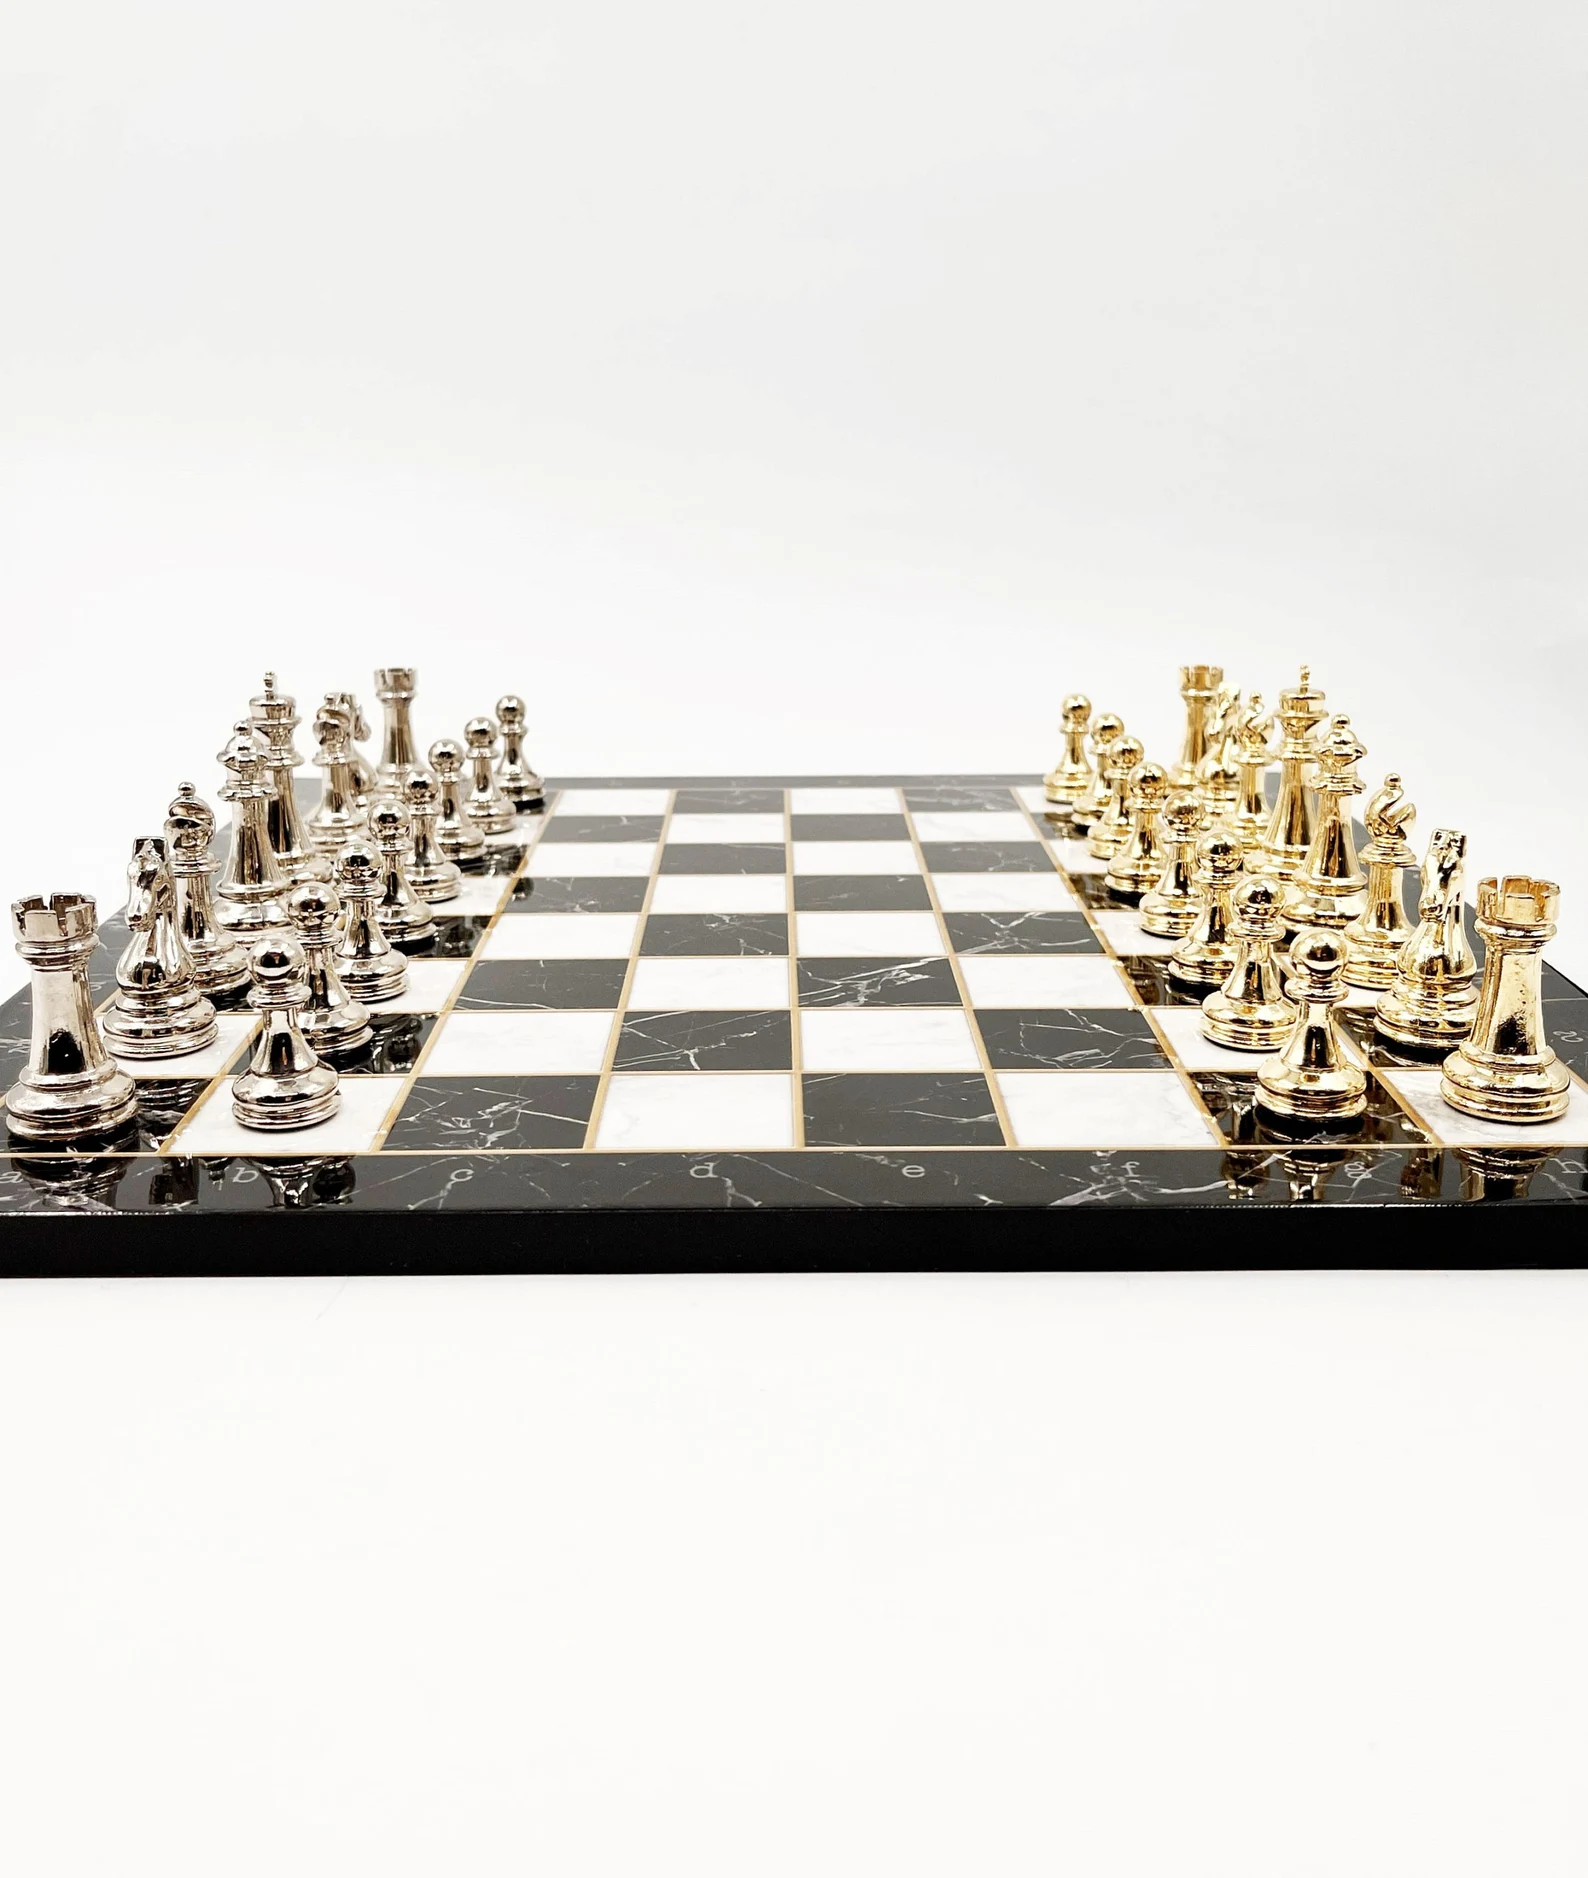 Large Premium Chess Set With Metal Pieces Board, Classic Chess Pieces Copper, Gold, Silver, Black And White